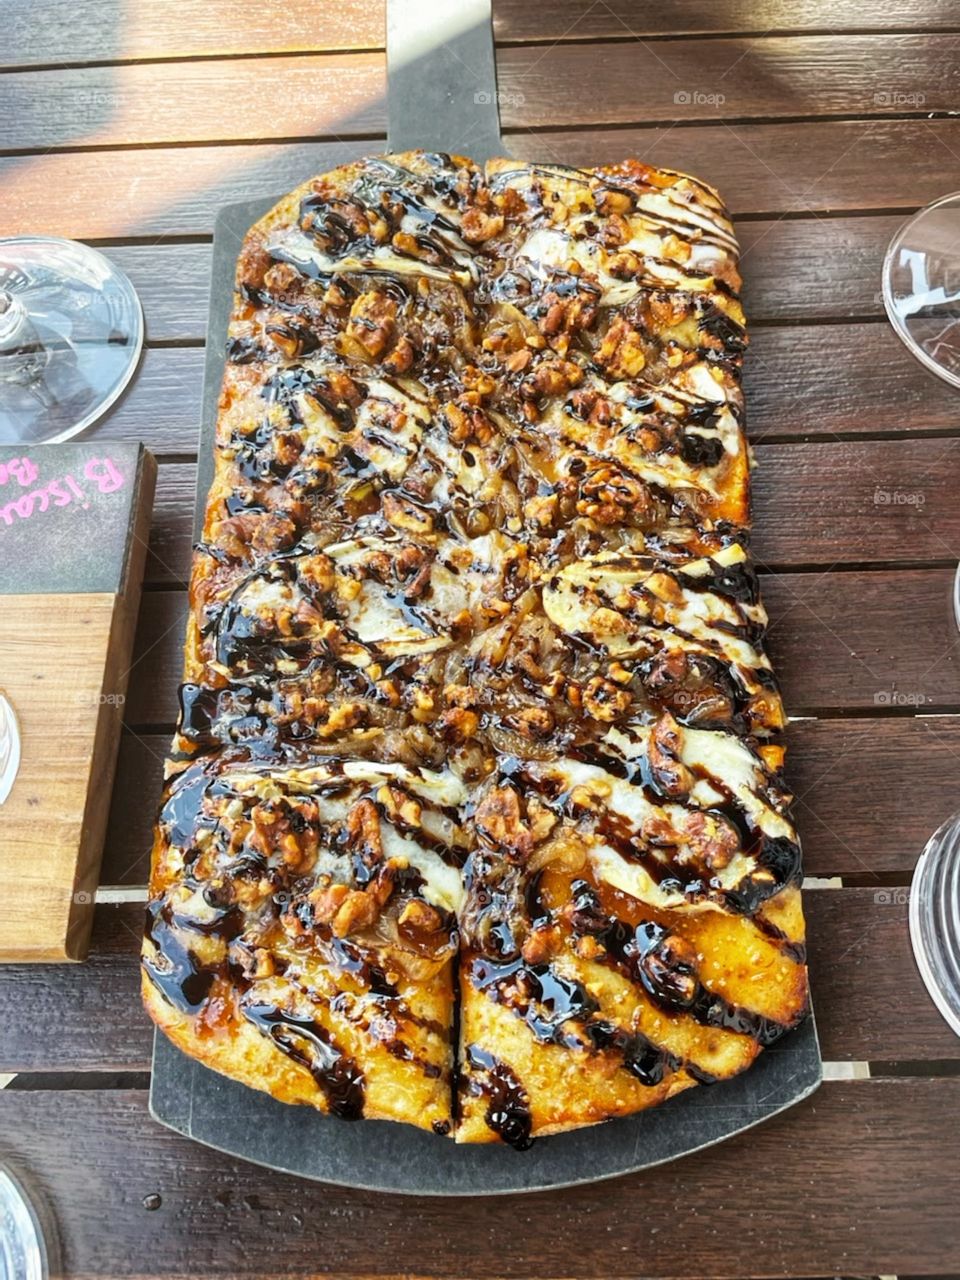 Yummy pizza with chocolate sauce, pastry pizza